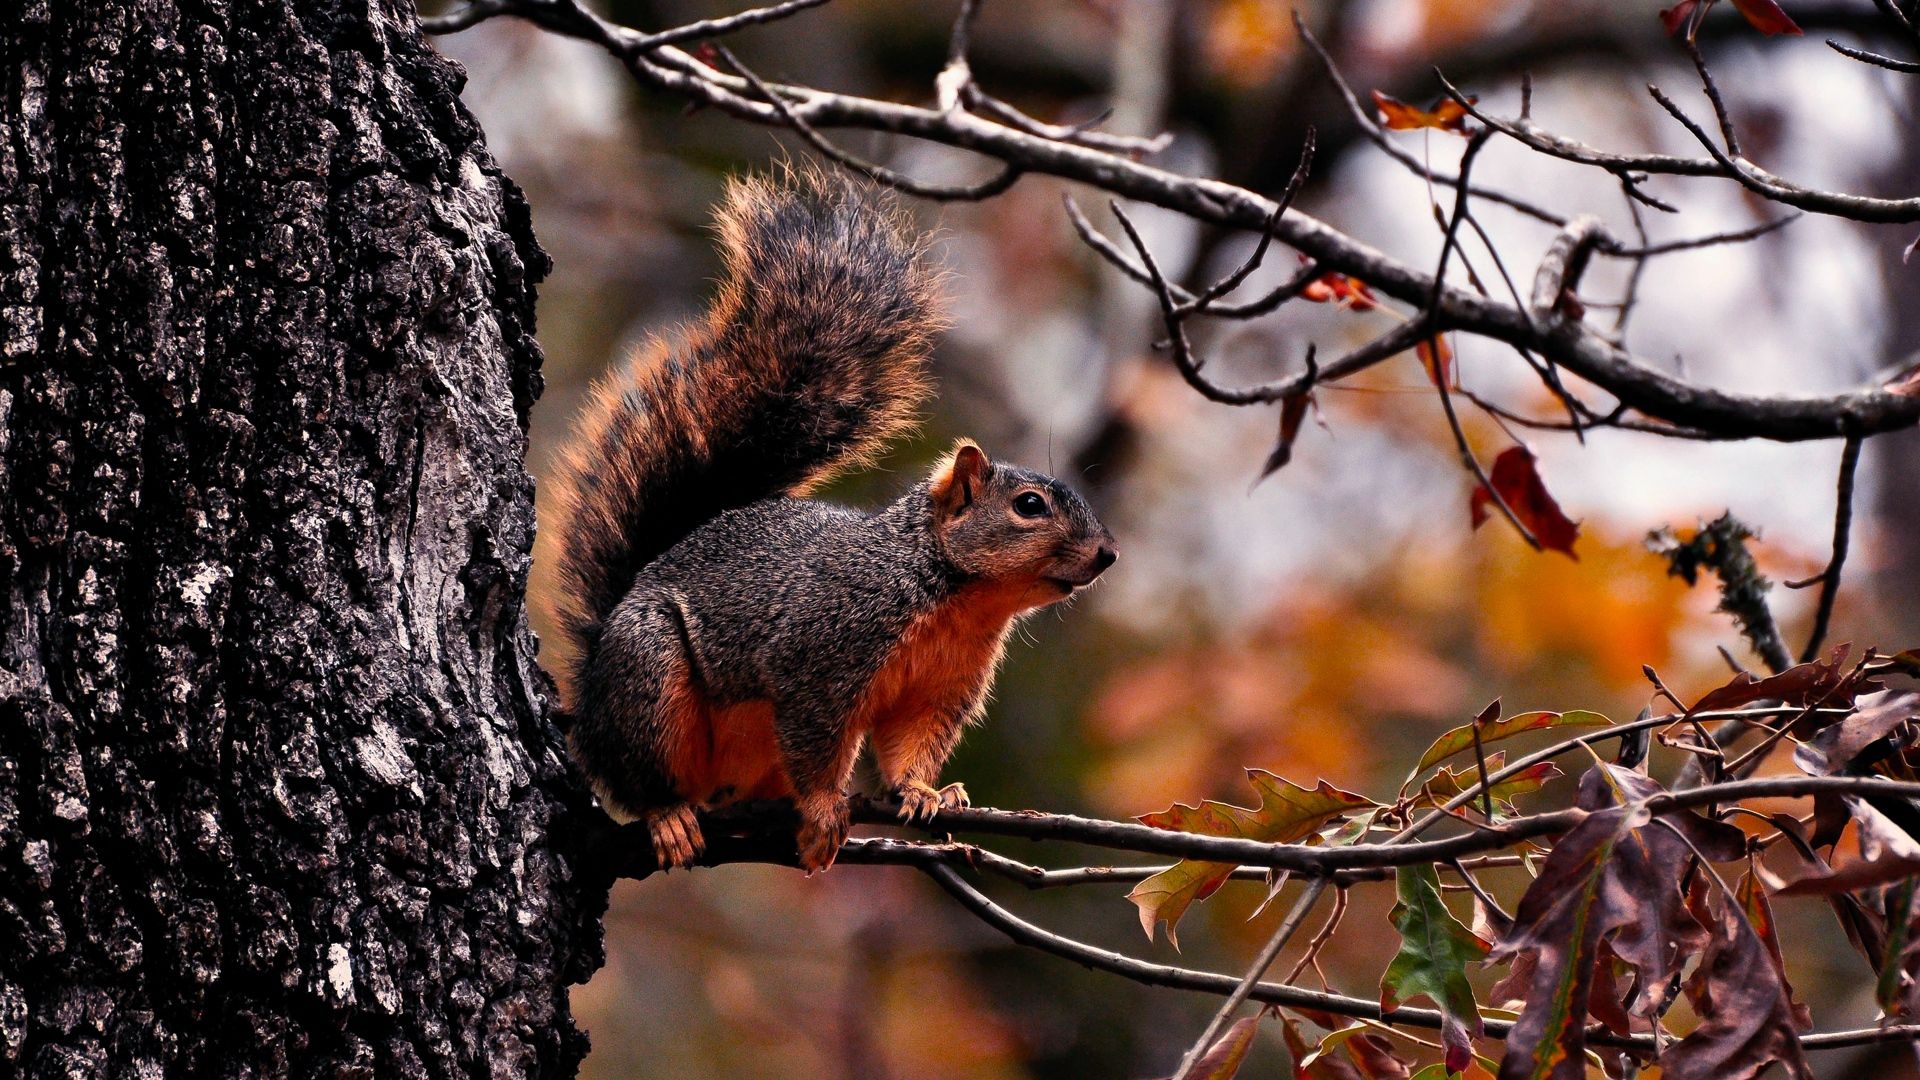 Download Wallpaper 1920x1080 squirrel, tree, autumn, branches, leaves Full HD 1080p HD Background